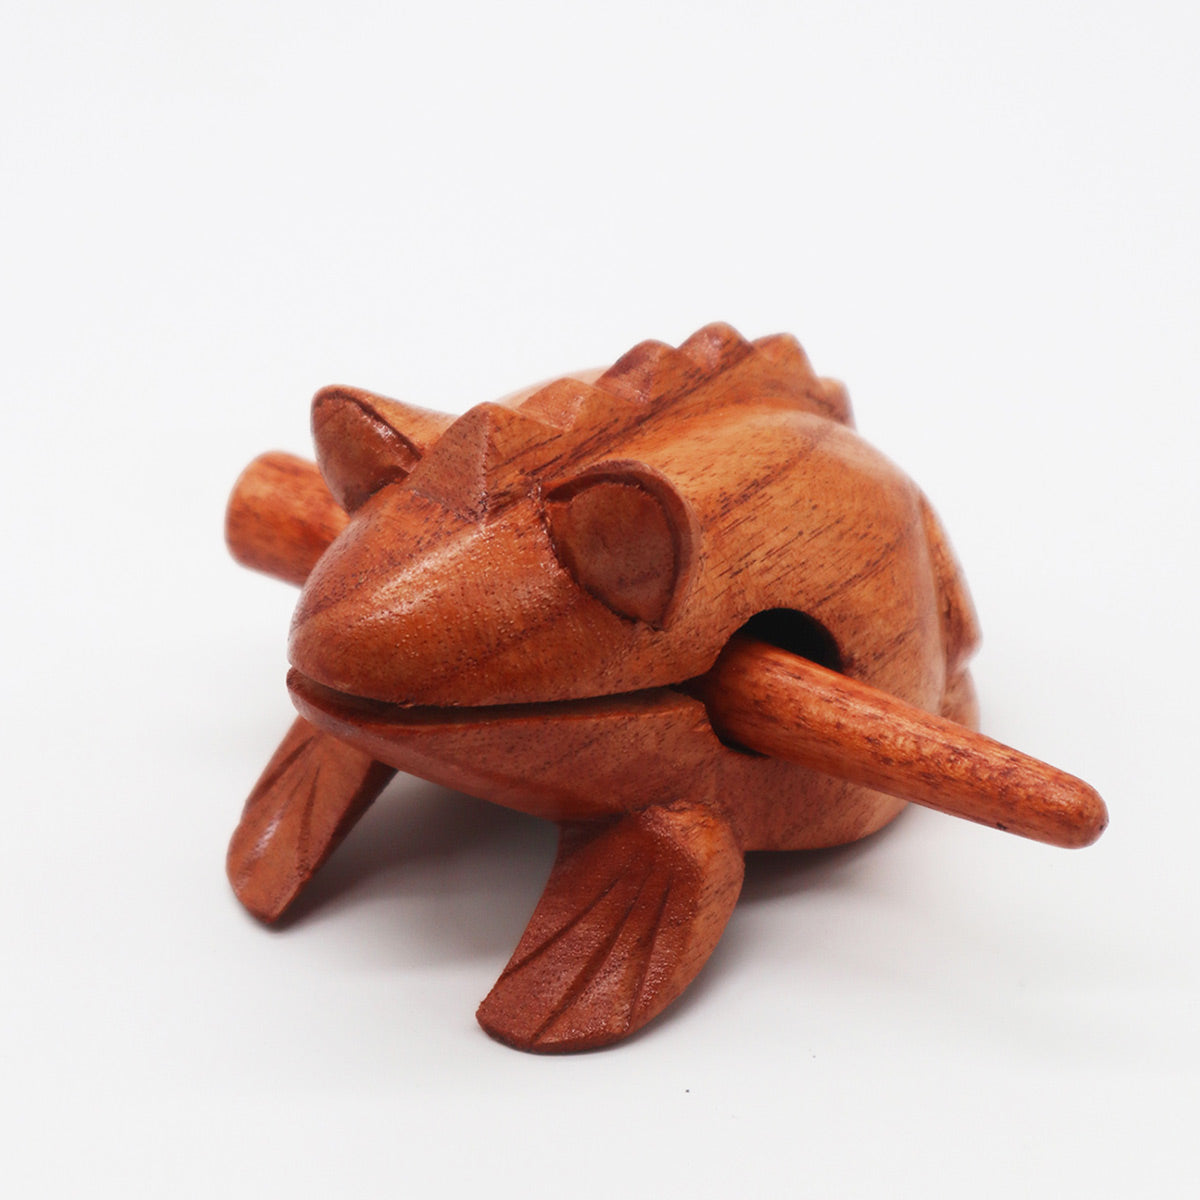 Small Croaking Wooden Frog